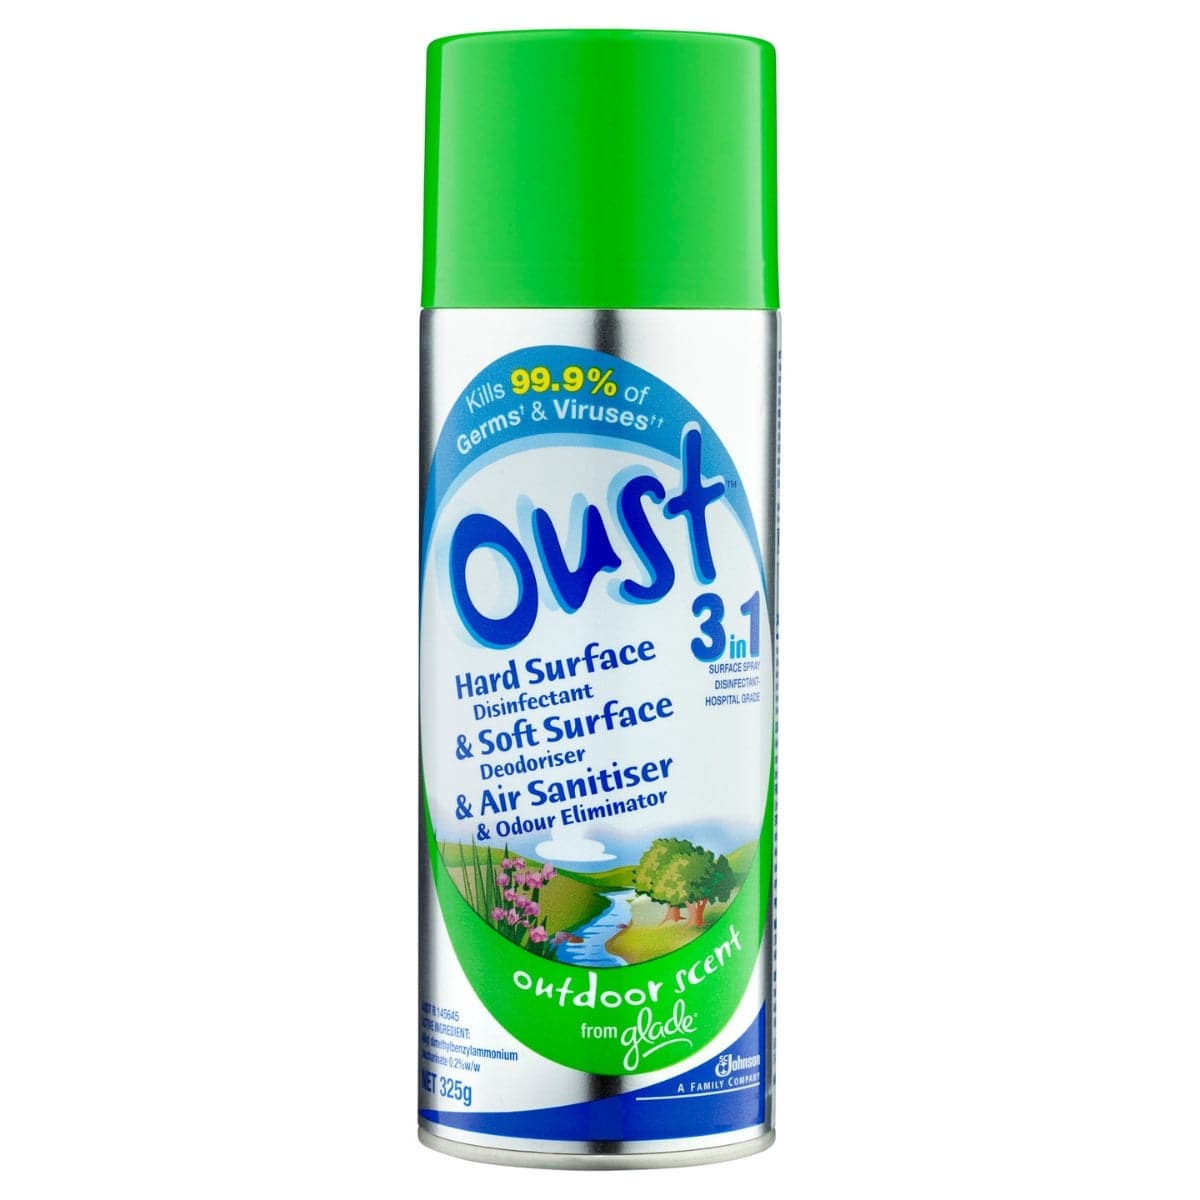 OUST 3 IN 1 SURFACE SPRAY DISINFECTANT - Hospital Grade